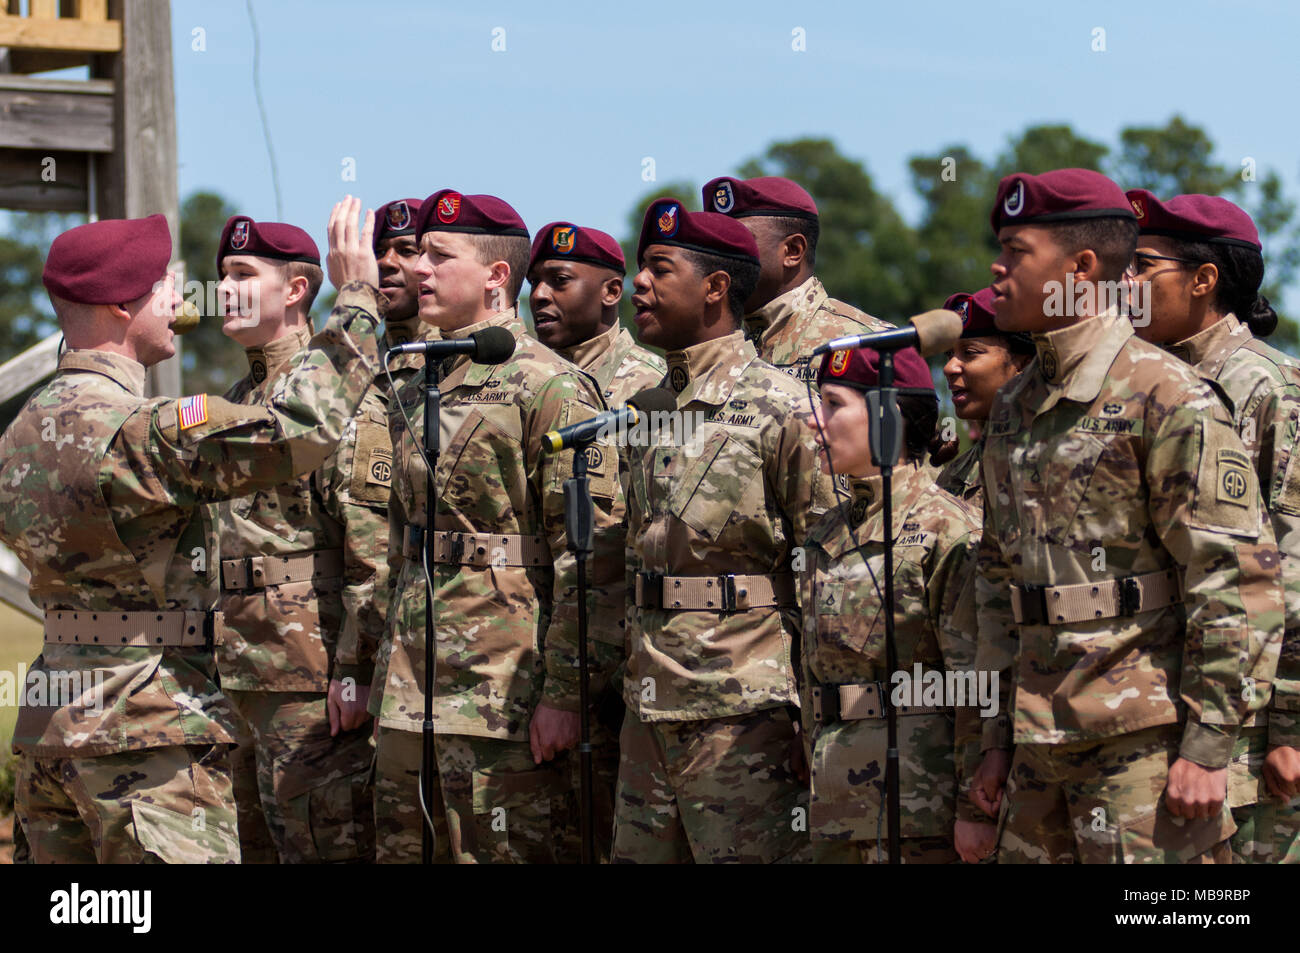 Pinehurst, North Carolina, USA. 8th Apr, 2018. April 8, 2018 - Pinehurst, N.C., USA - The 82nd Airborne Division All American Chorus performs during the opening ceremony at the 69th annual Spring Matinee Harness races sponsored by the Pinehurst Driving & Training Club, at the Pinehurst Harness Track, Pinehurst, N.C. The Pinehurst Harness Track is a 111-acre equestrian facility that has been a winter training center for standardbred horses since 1915. This year's races commemorate the 103rd anniversary of the track. Credit: Timothy L. Hale/ZUMA Wire/Alamy Live News Stock Photo